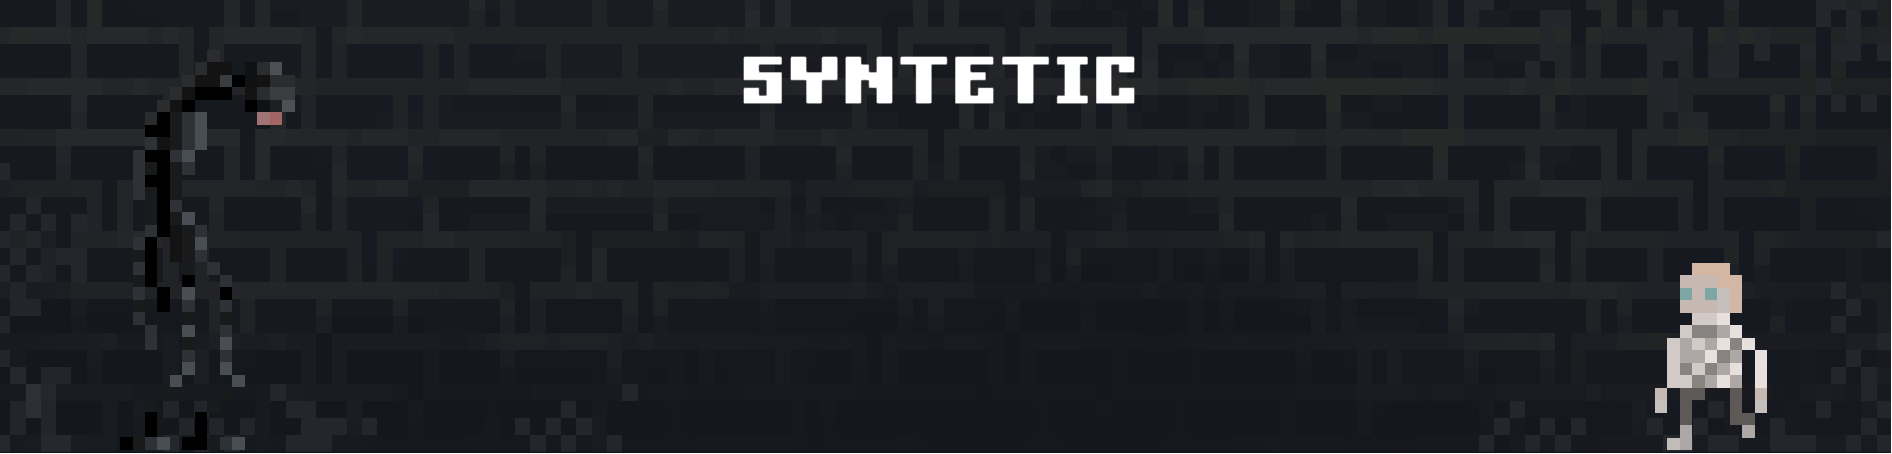 Syntetic - 2D pixel horror cooperation game for 2 players